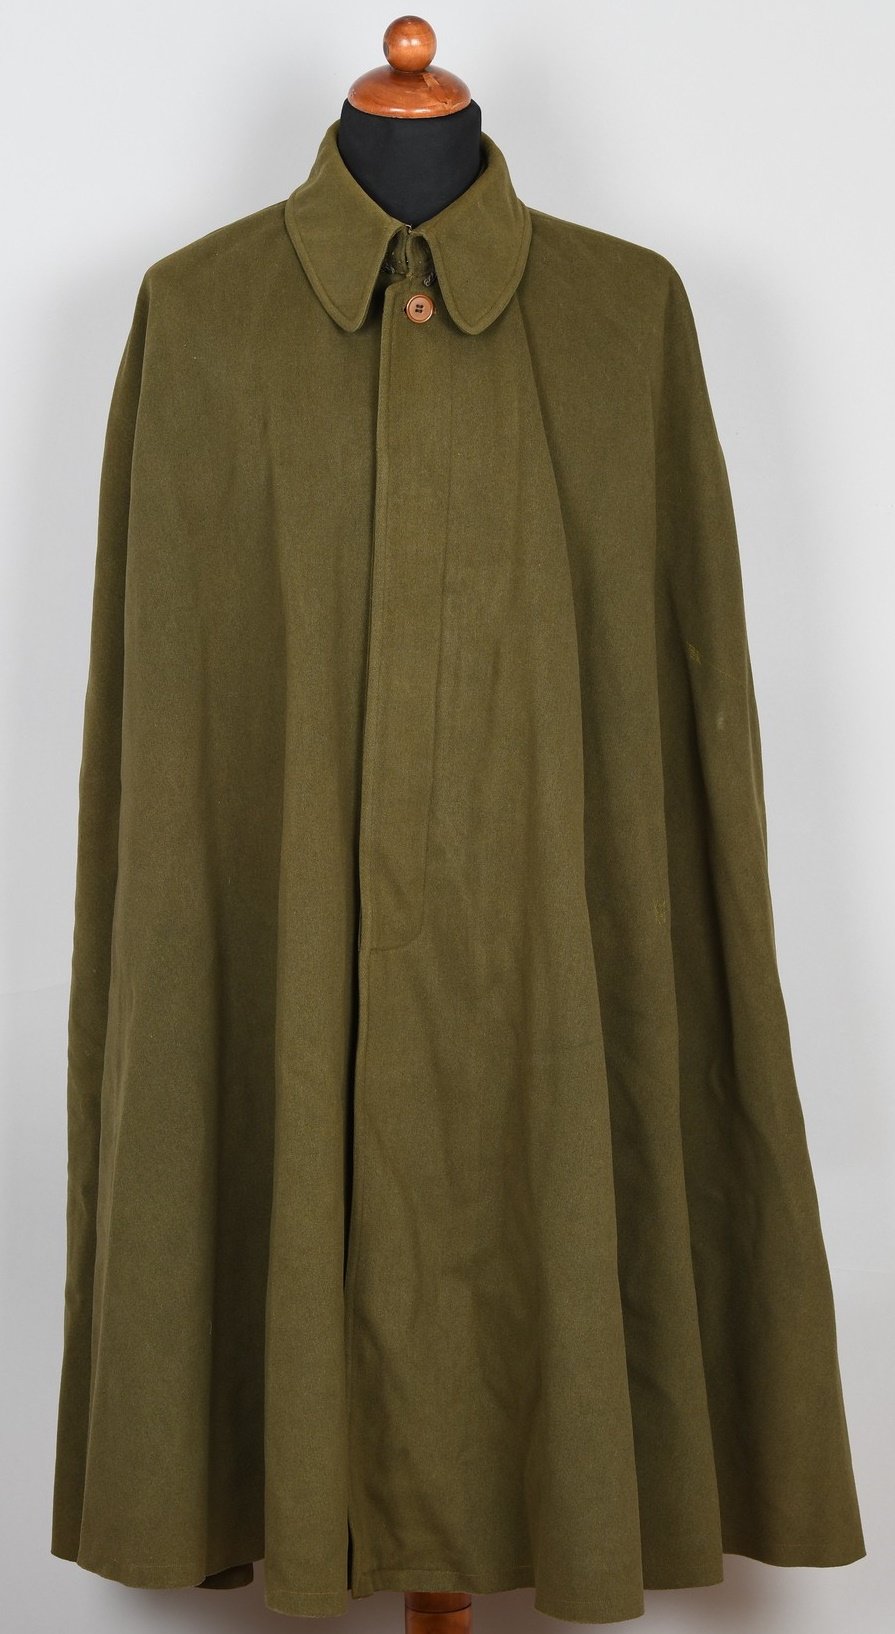 Japanese WWII Army Officers Cape